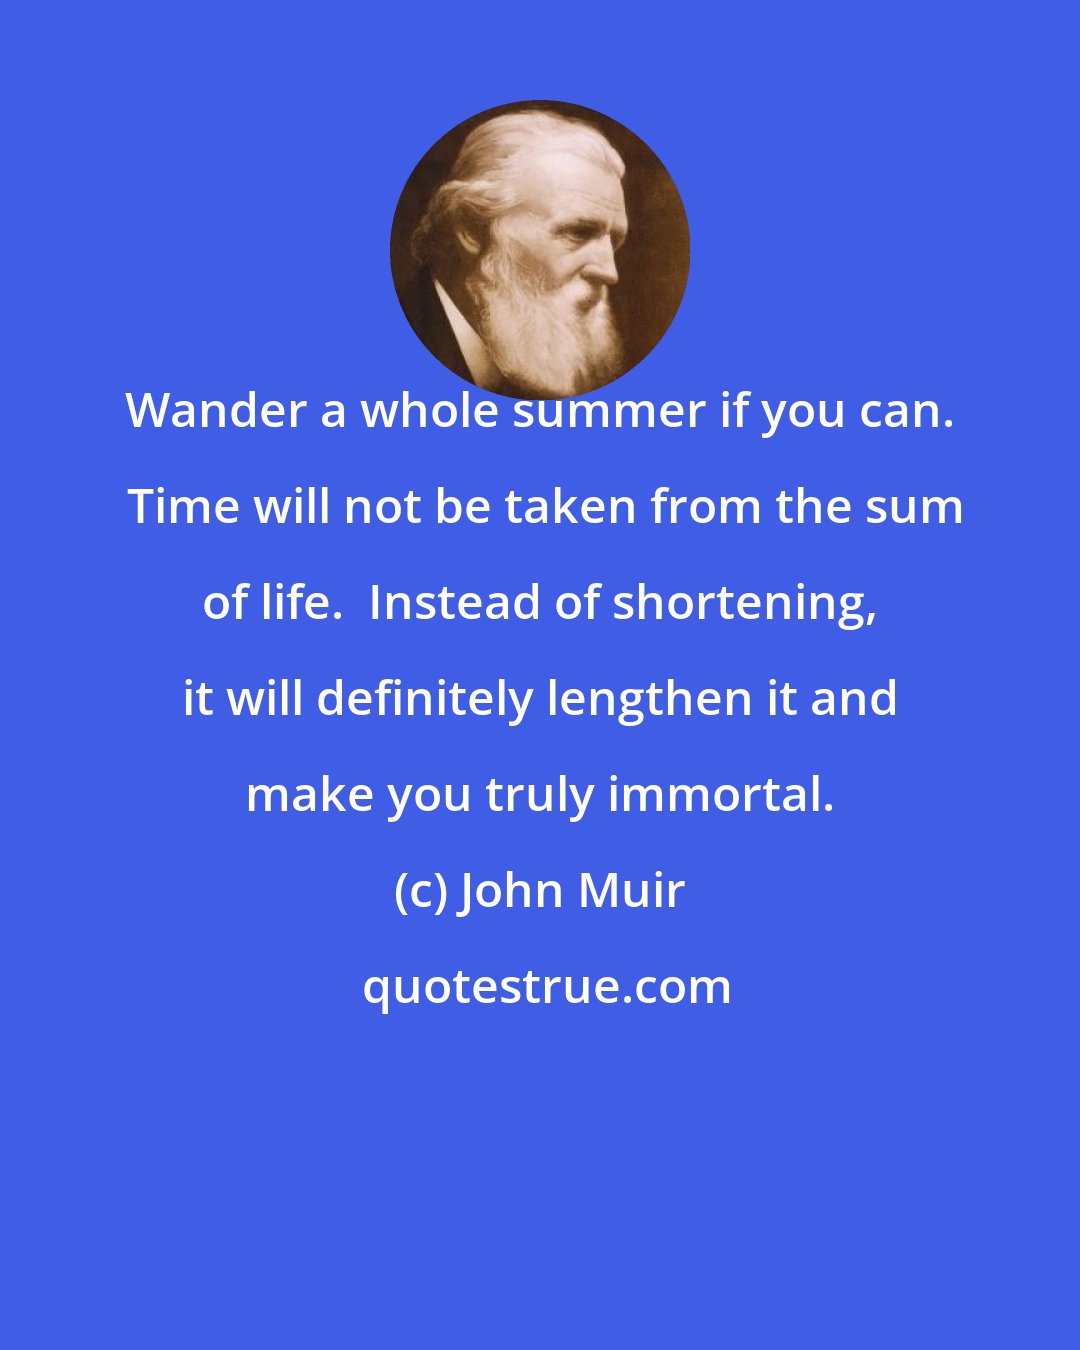 John Muir: Wander a whole summer if you can.  Time will not be taken from the sum of life.  Instead of shortening, it will definitely lengthen it and make you truly immortal.